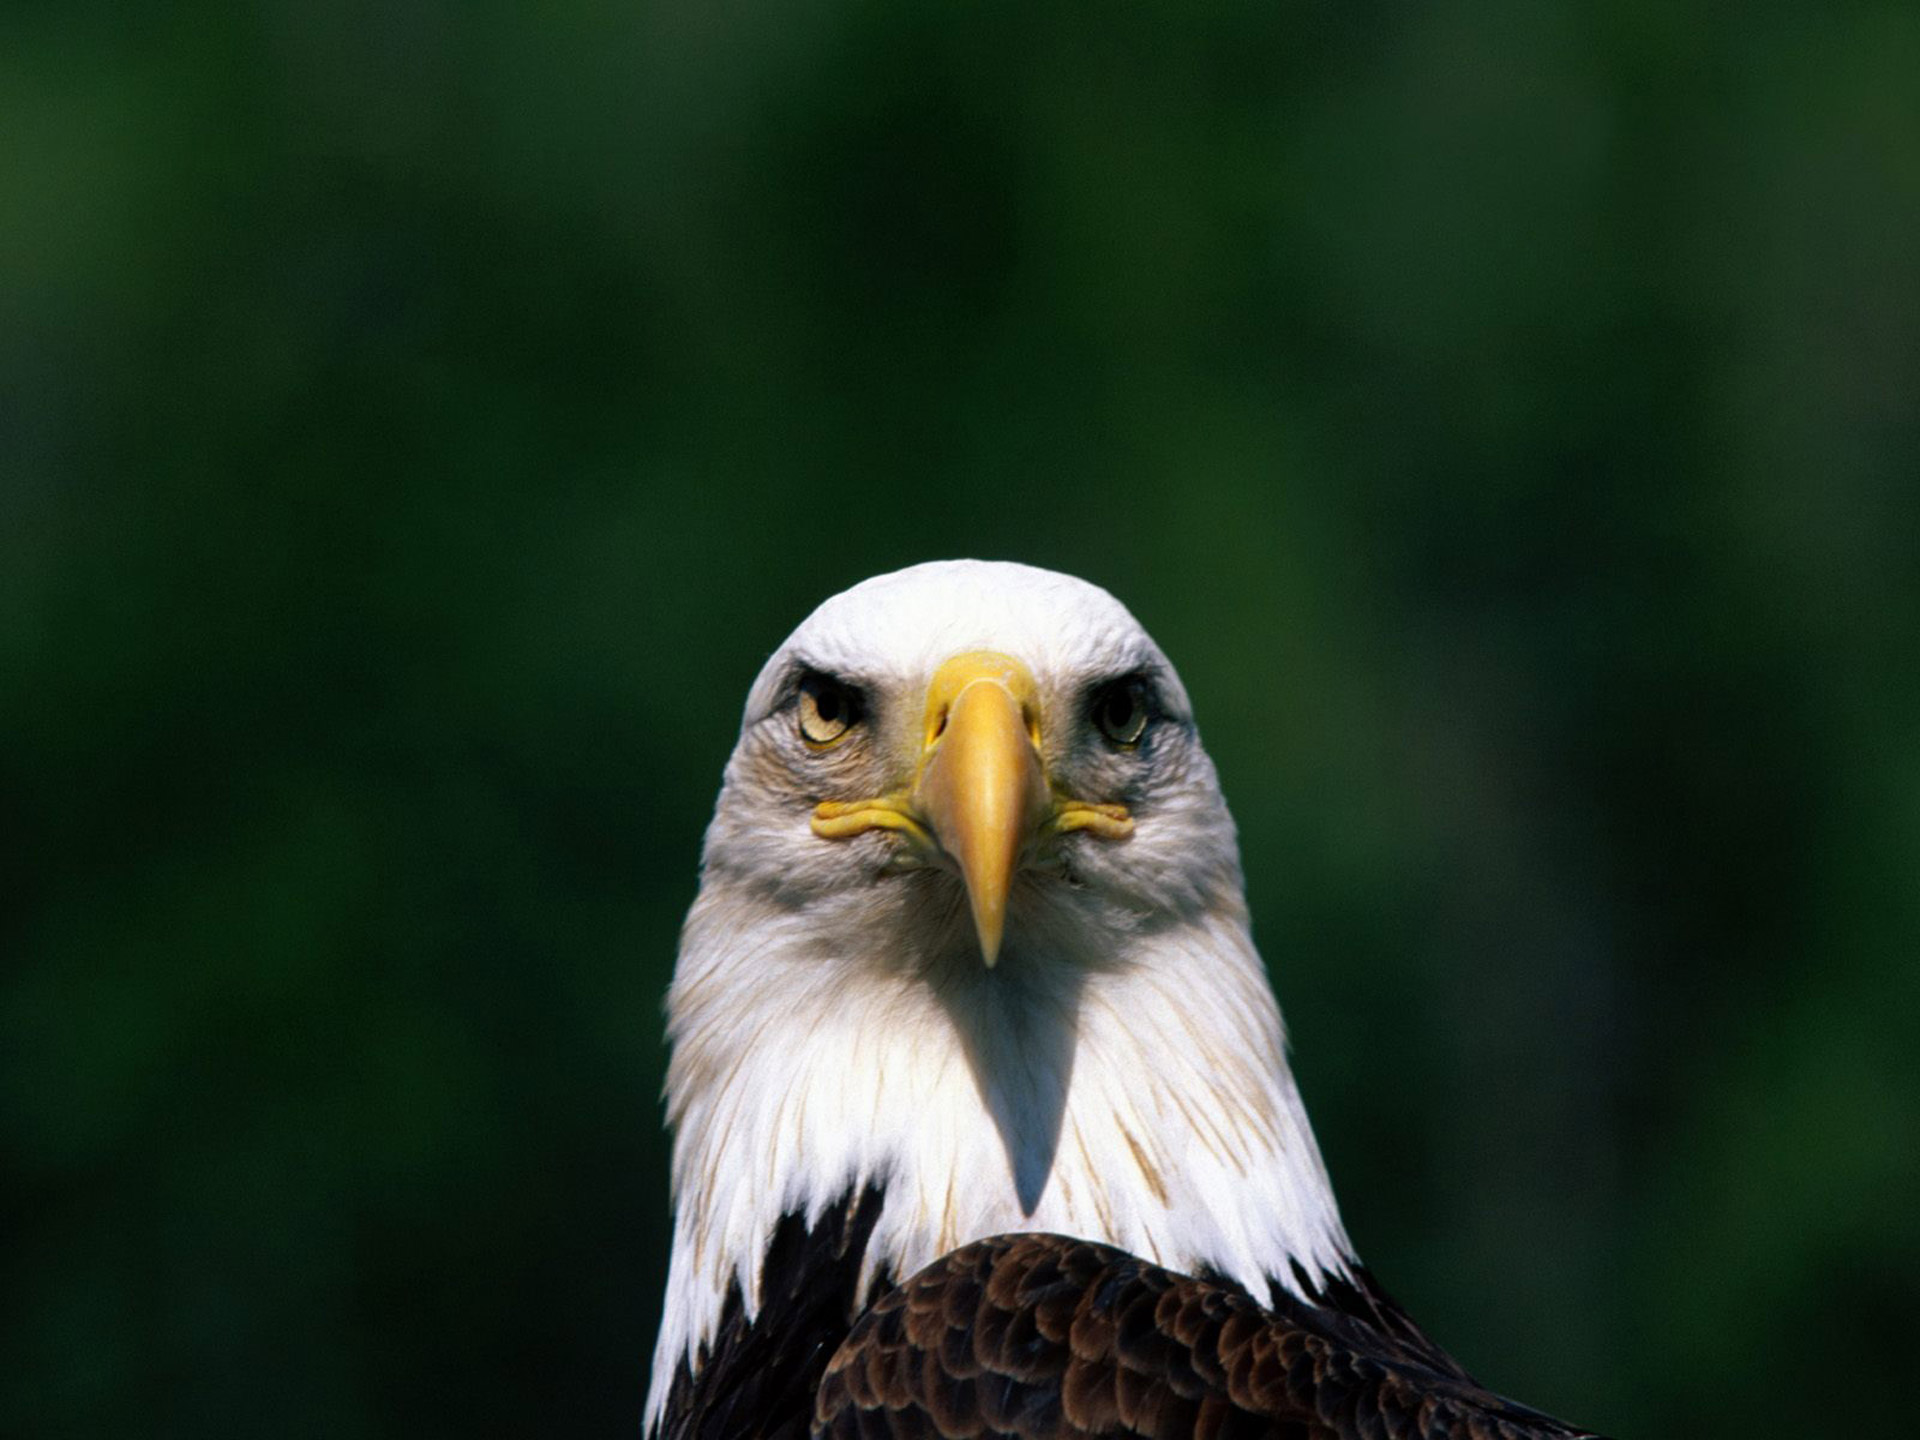 eagle head | wallpapers55.com - Best Wallpapers for PCs, Laptops ...